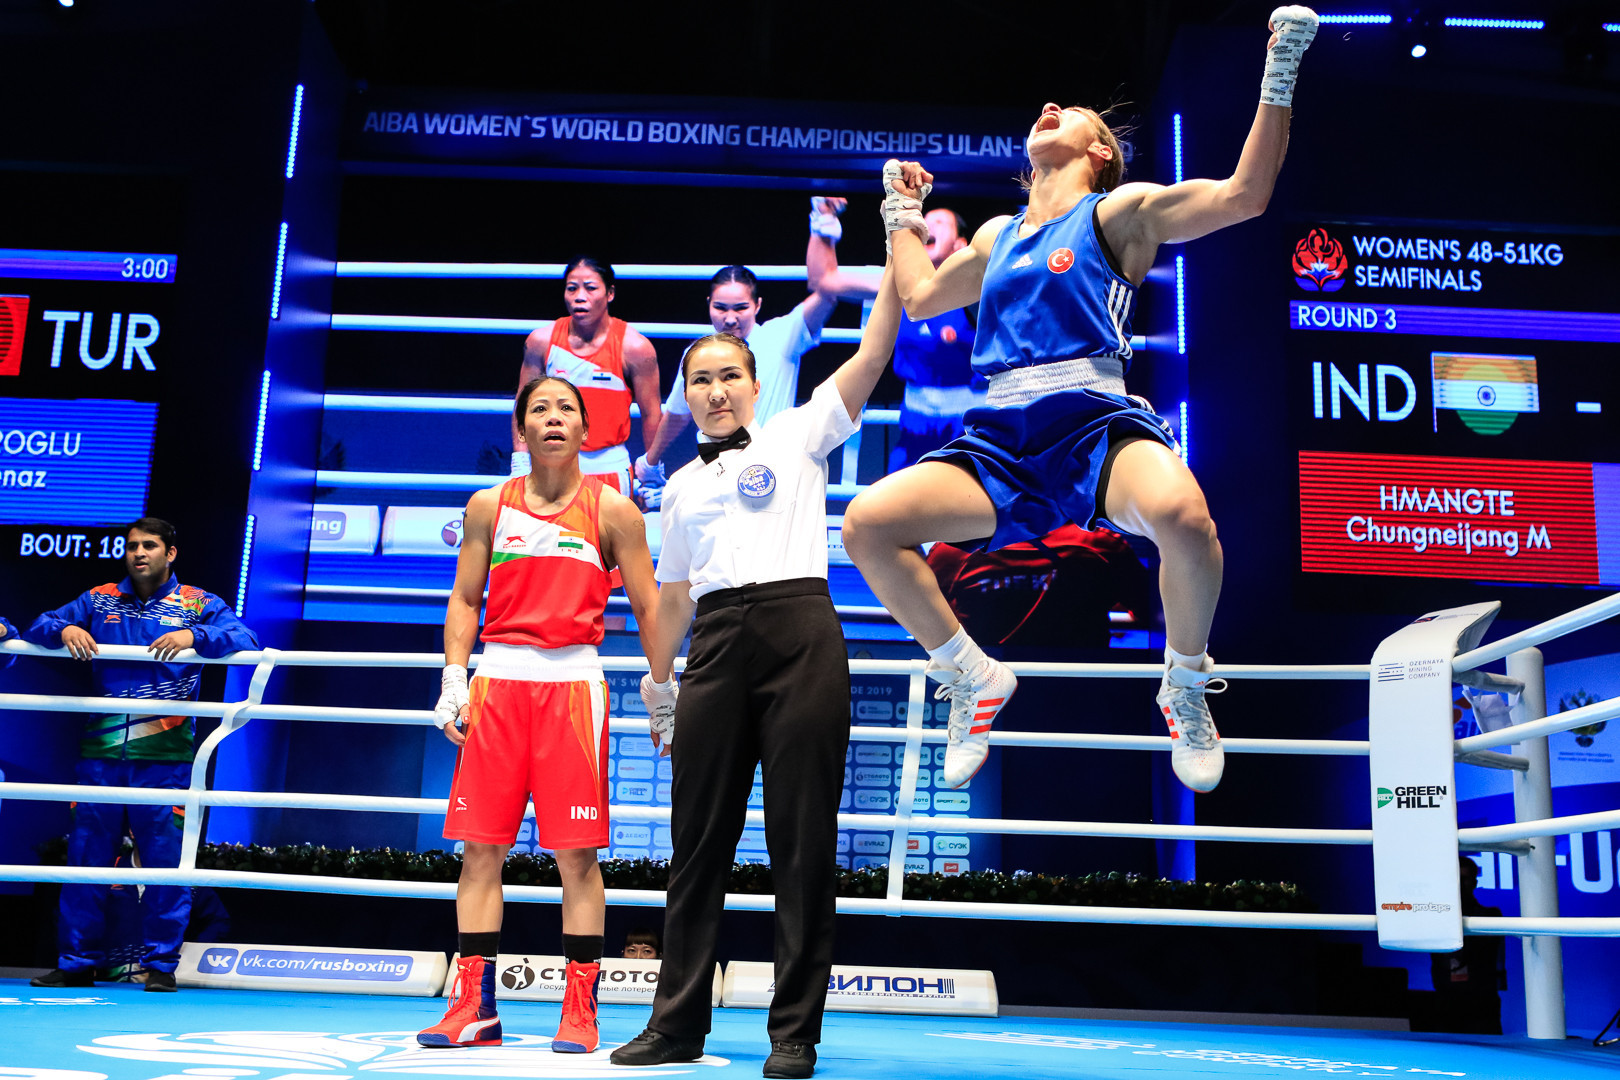 Mary Kom of India looked on in despair as Buse Çakıroğlu of Turkey reached the flyweight final at the AIBA Women's World Championships ©AIBA